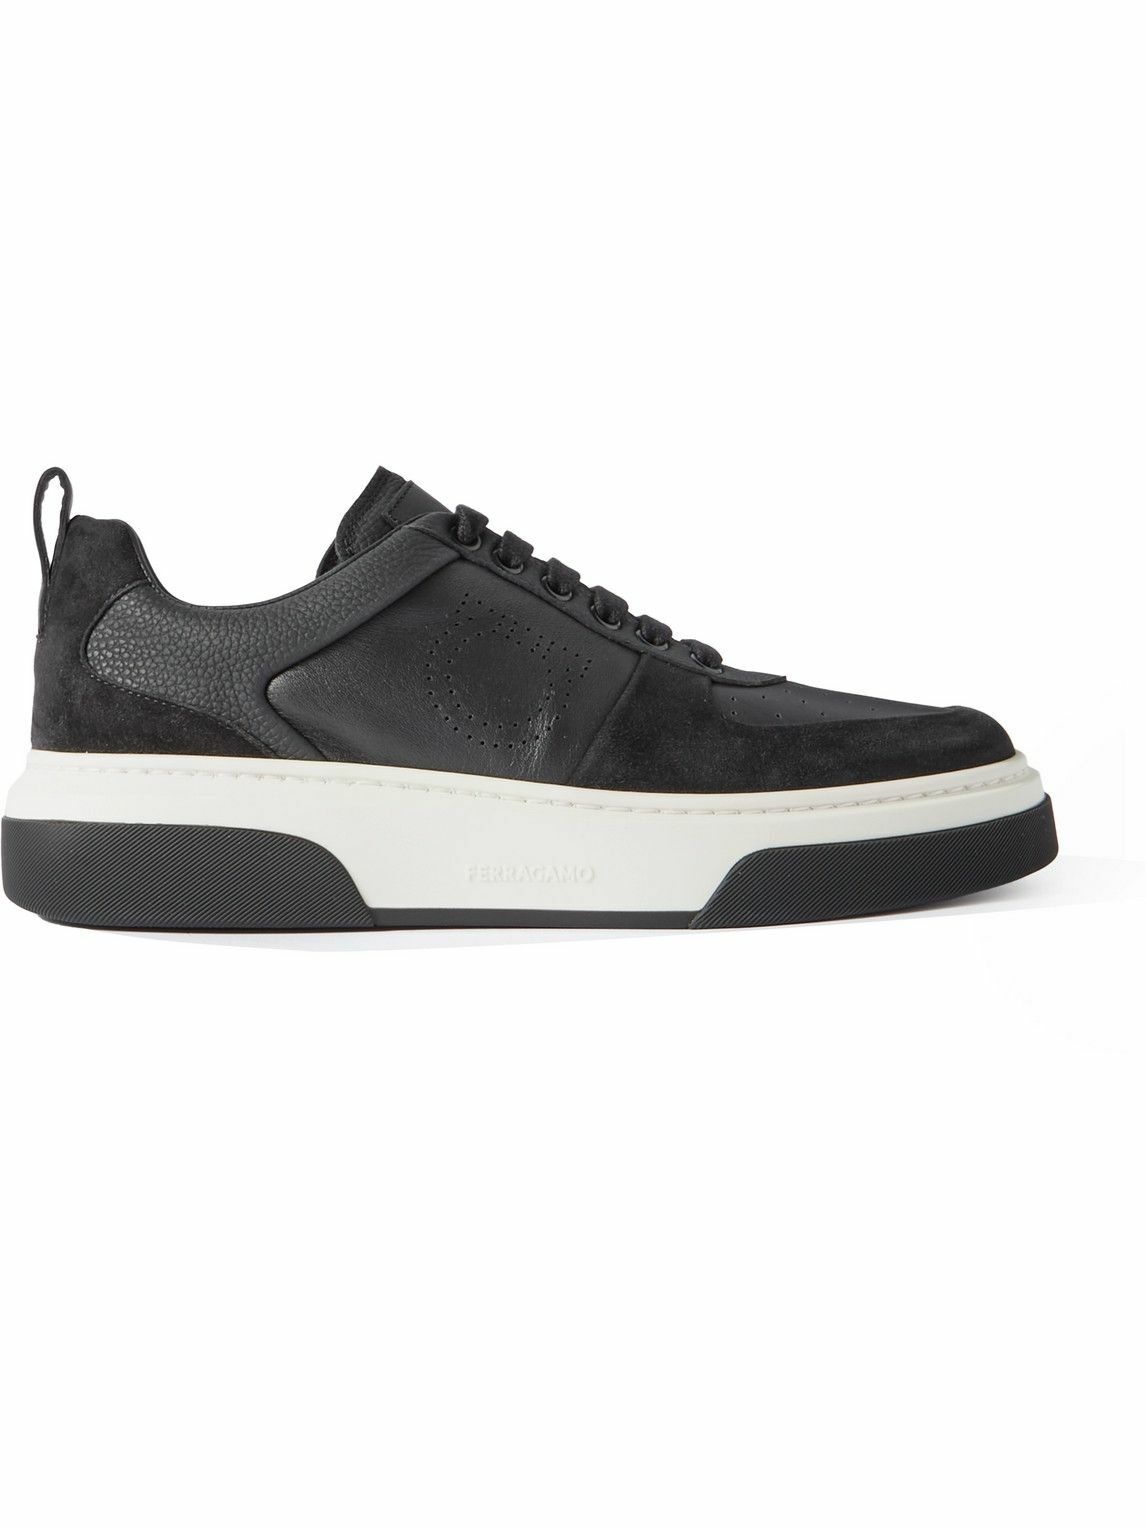 Photo: FERRAGAMO - Cassetta Suede-Trimmed Perforated Leather Sneakers - Black